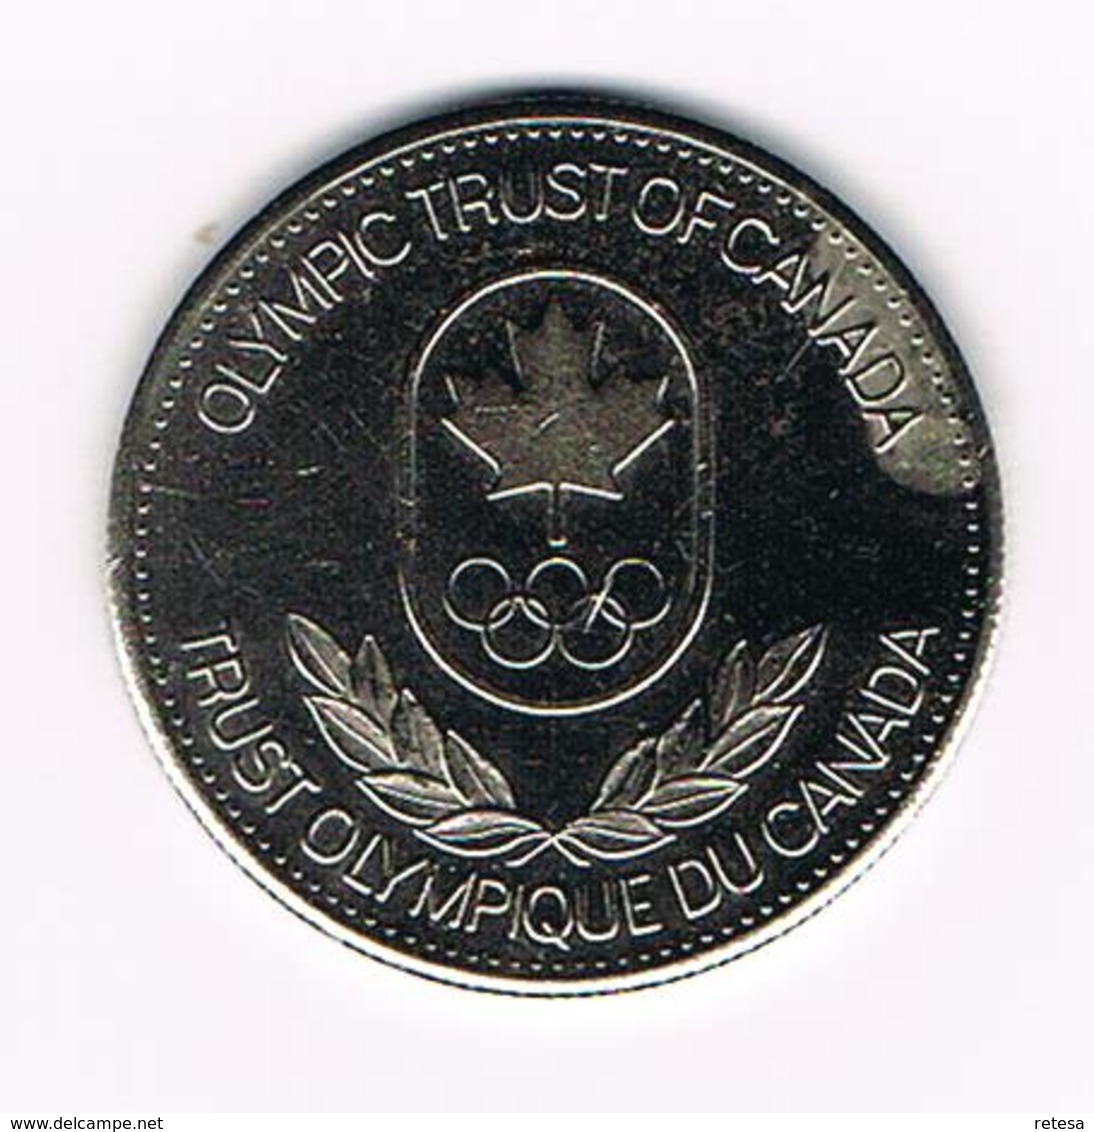 &  PENNING OLYMPIC TRUST OF CANADA  YACHTING 1980 - Souvenir-Medaille (elongated Coins)